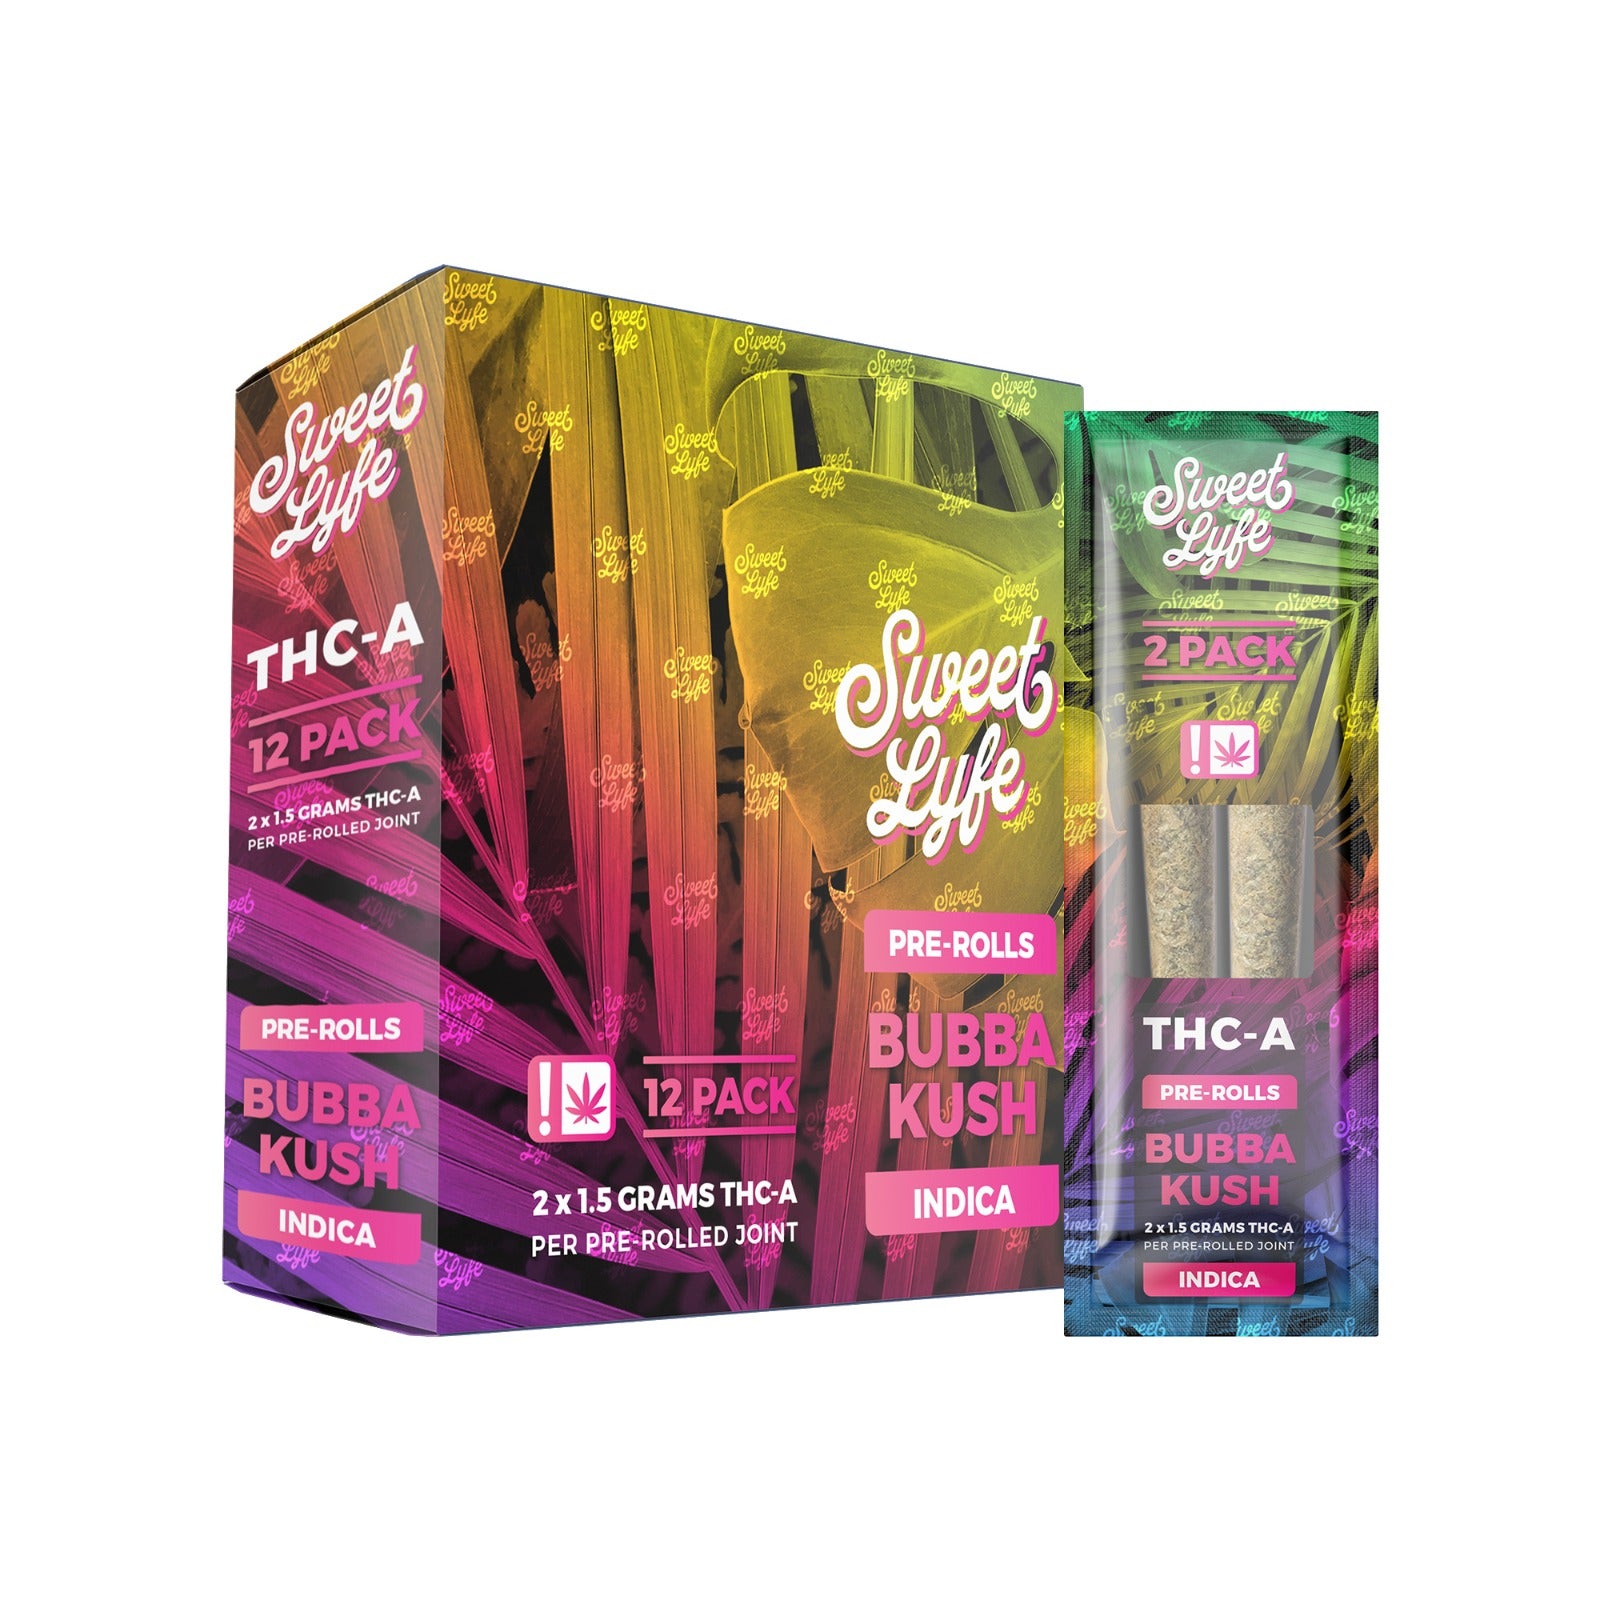 2 Pack Pre-Rolls Joint THC-A|Bubba Kush - Indica